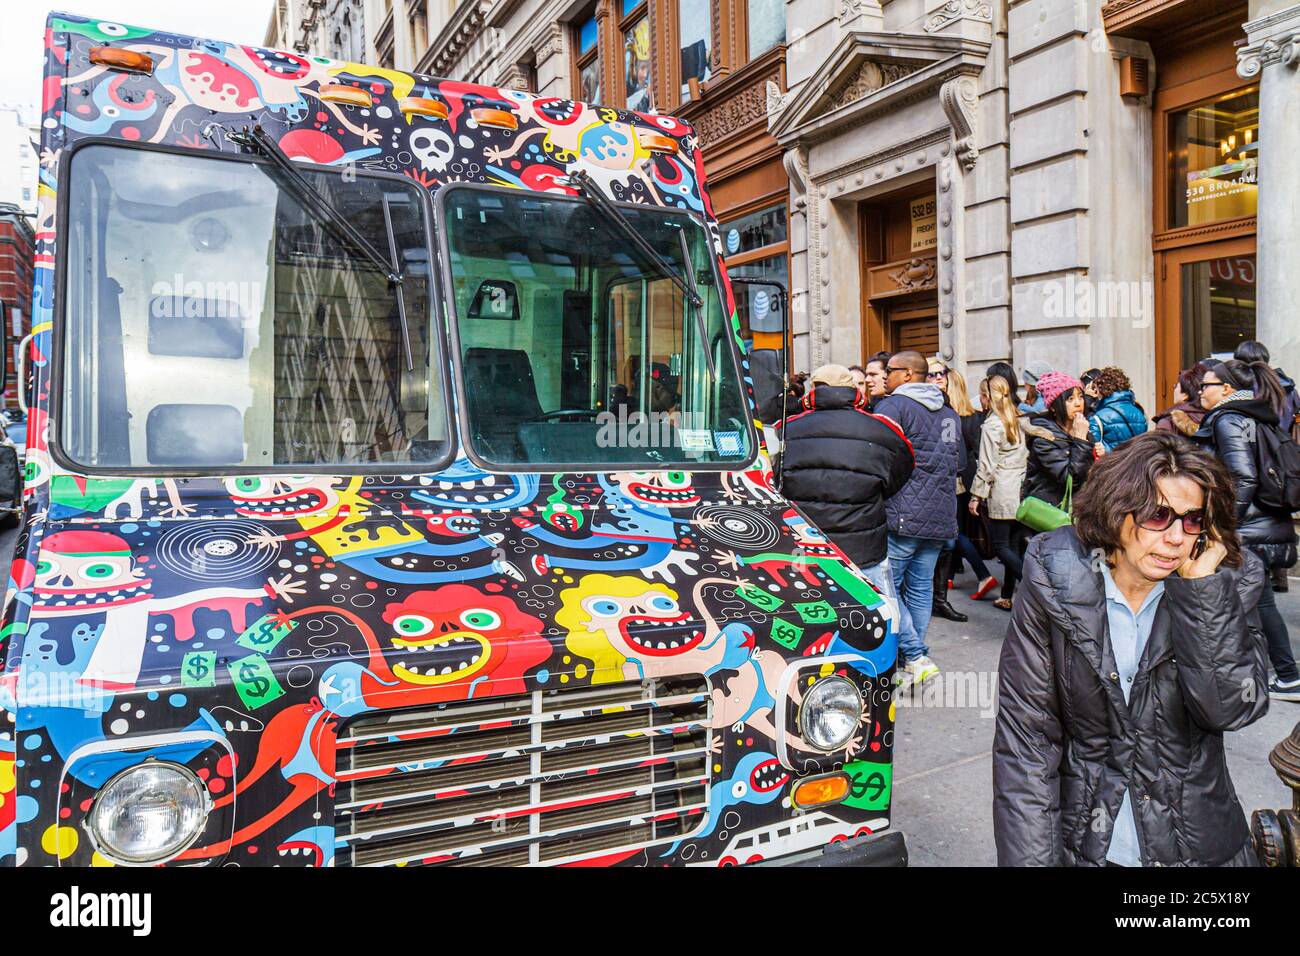 New York City,NYC NY Lower,Manhattan,SoHo,Broadway,parked delivery truck,van,commercial vehicle,wild paint job,cartoon figures,busy street,sidewalk,wo Stock Photo